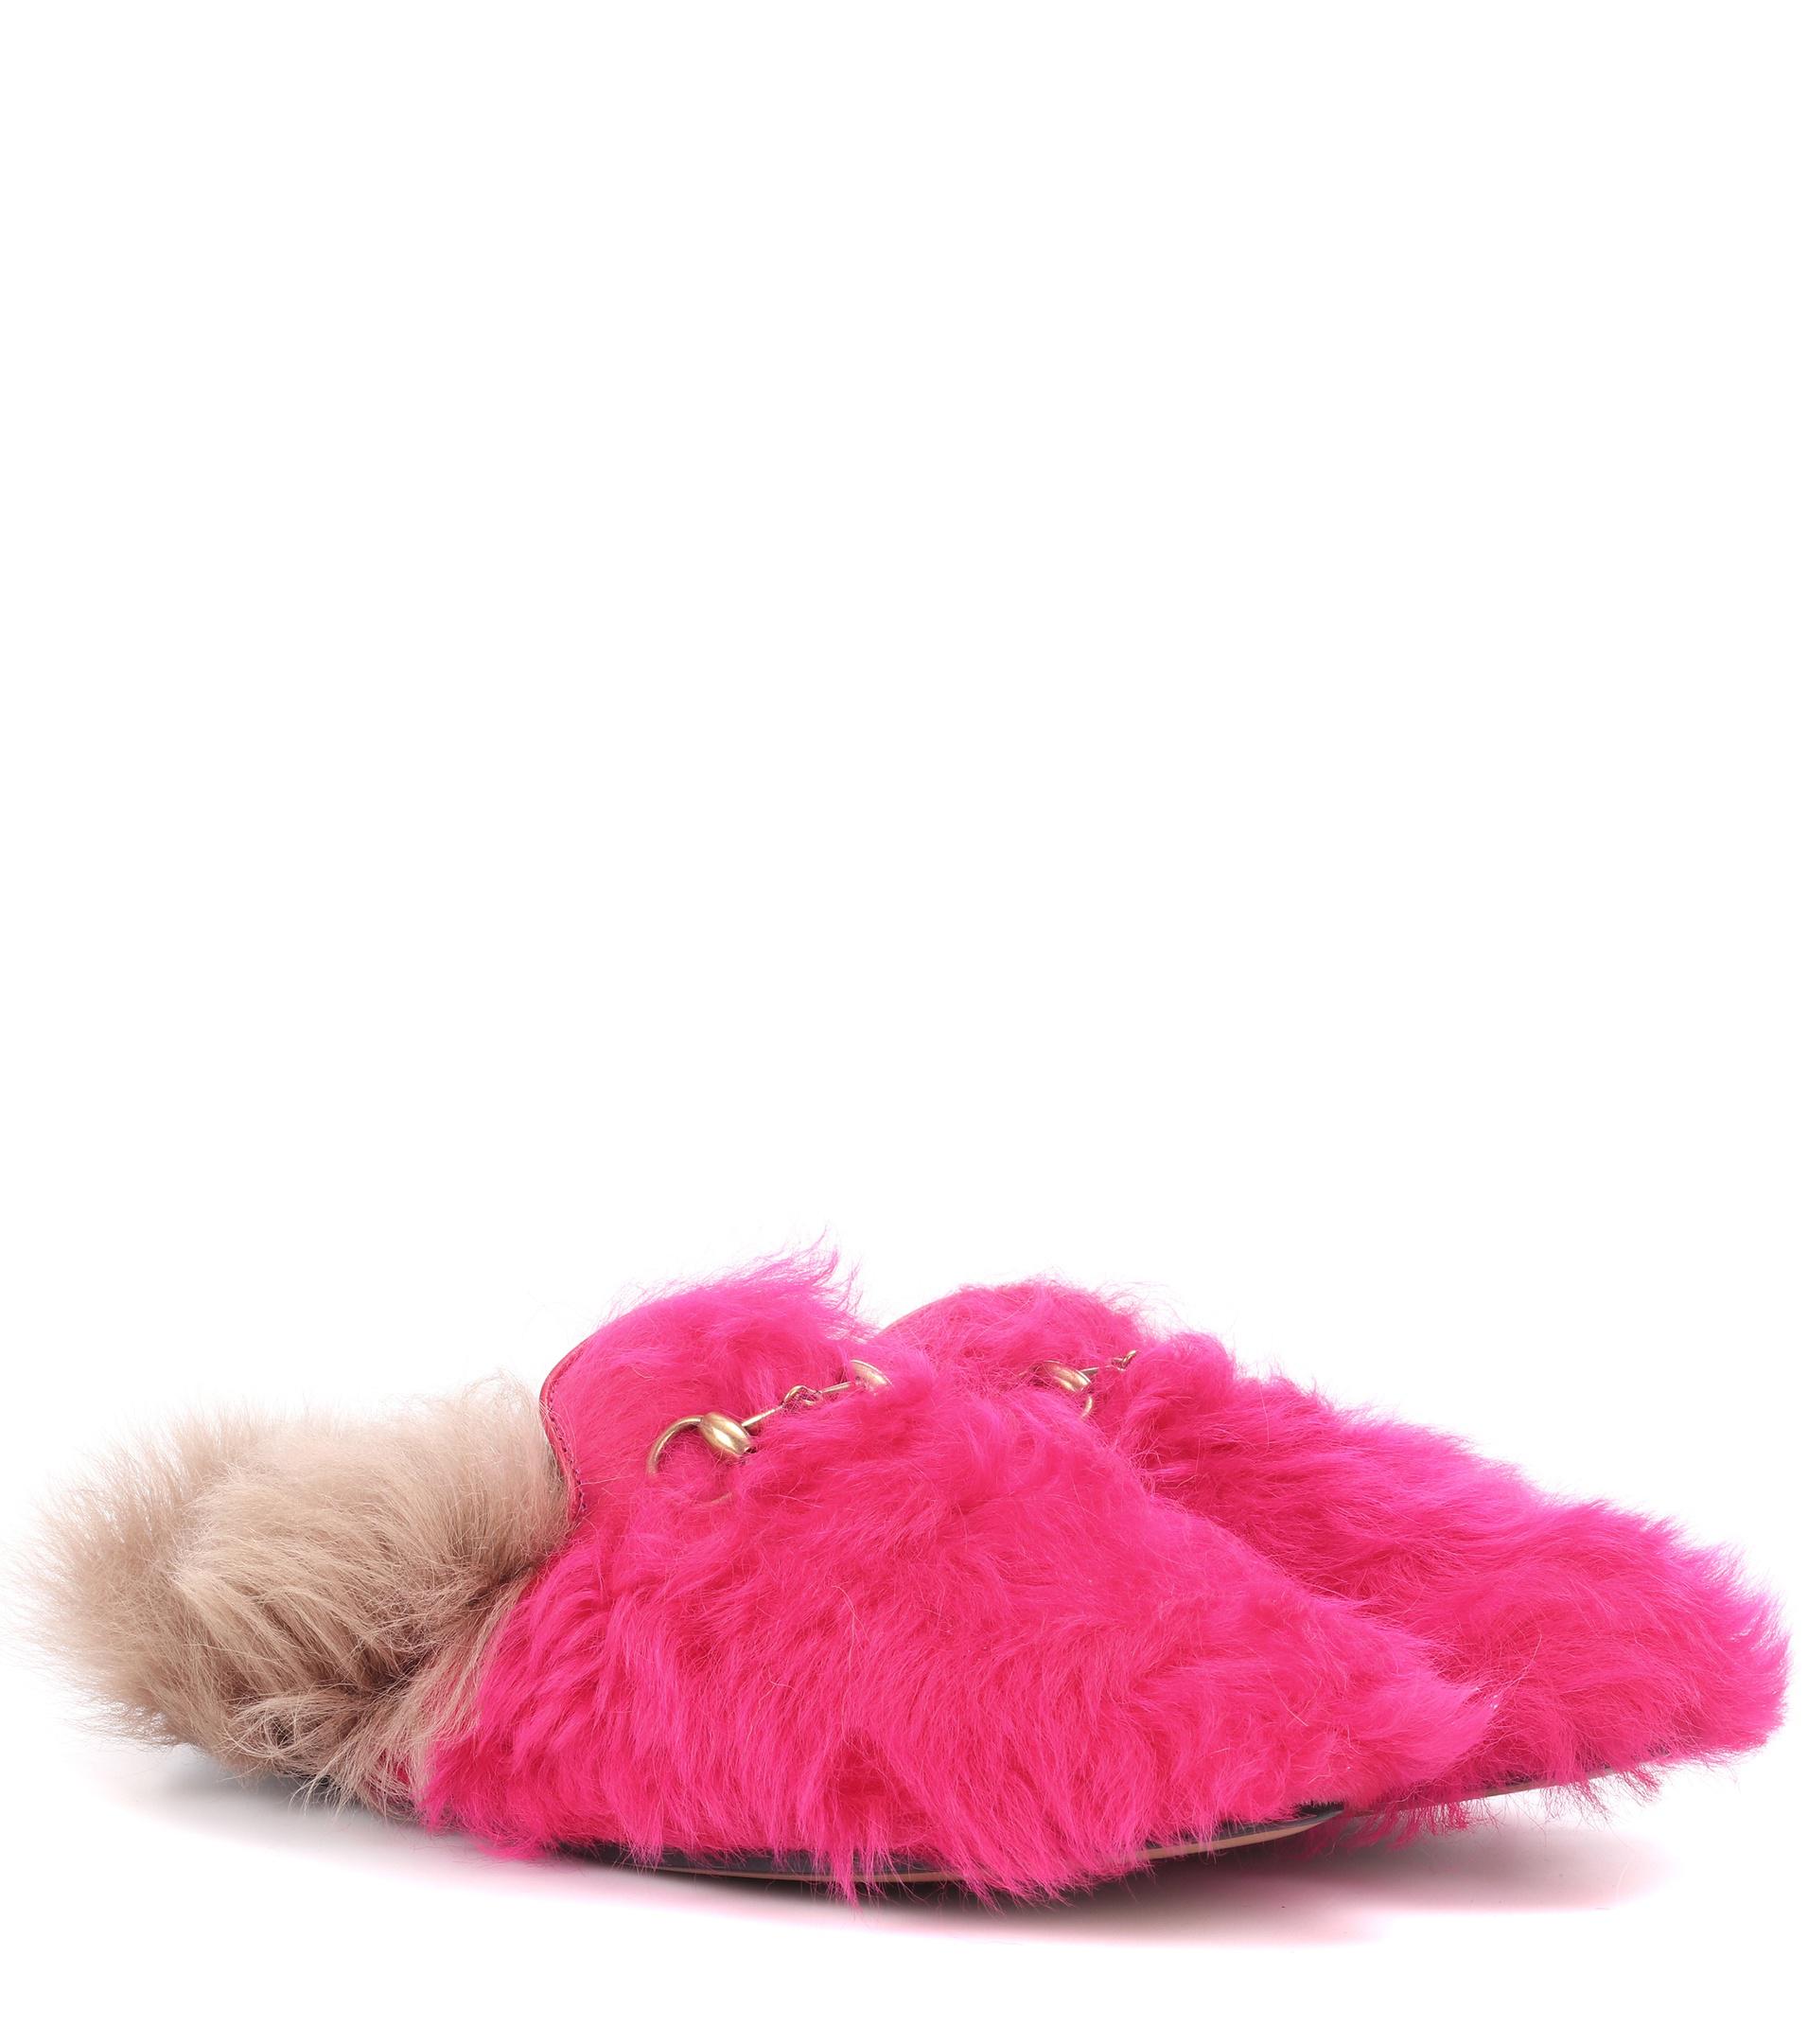 Gucci Princetown Shearling Slippers in Pink & Purple (Pink) - Lyst